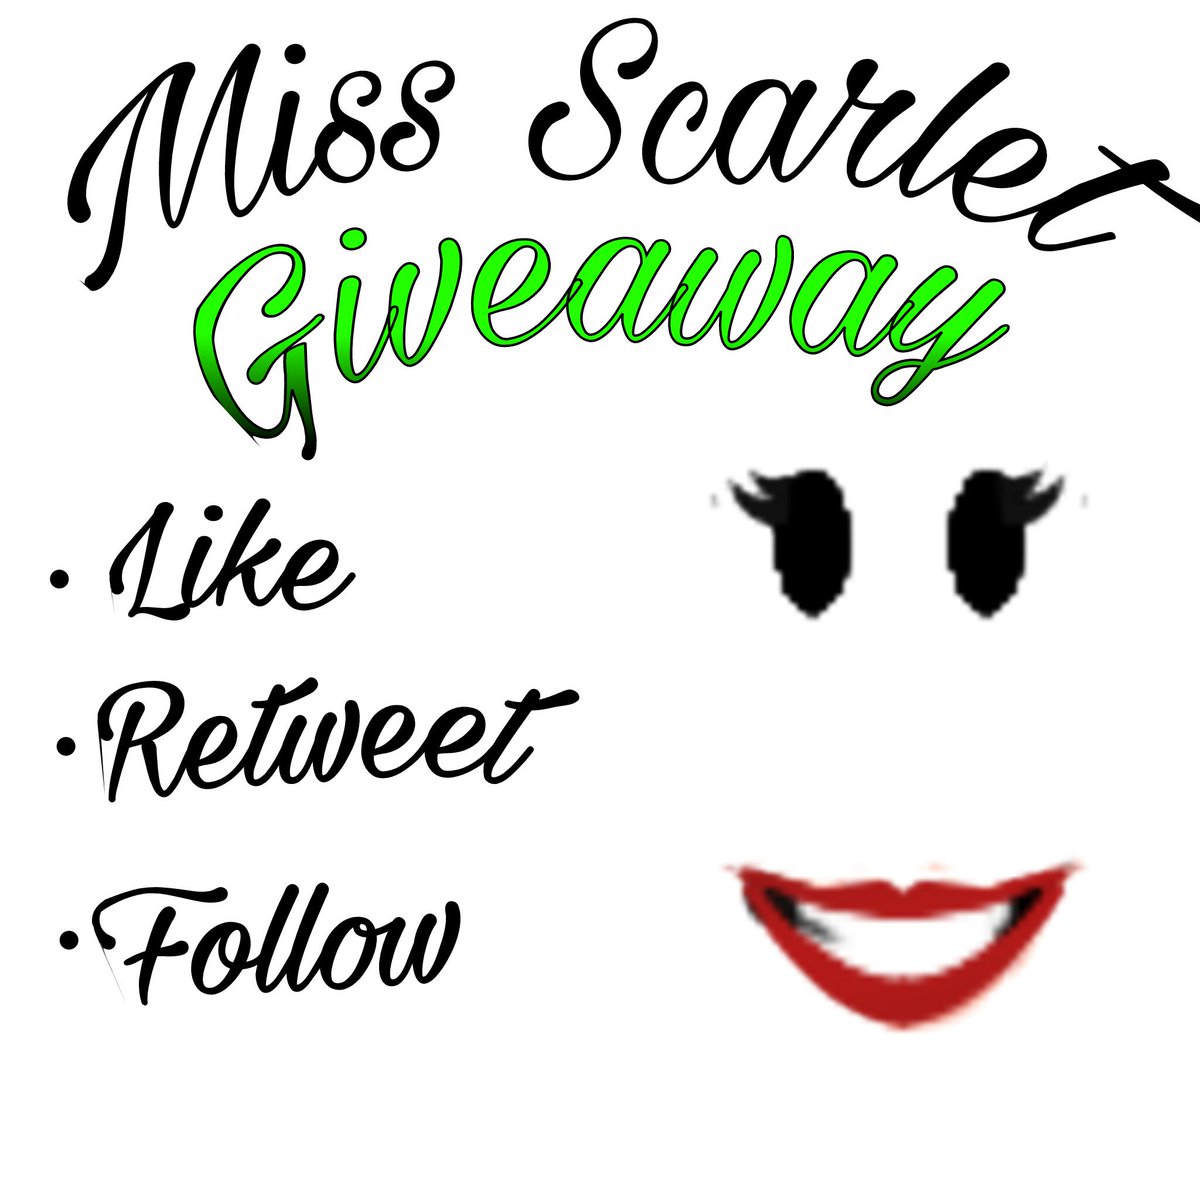 Cynosures On Twitter Miss Scarlet Giveaway Redo Worth 2k Robux Like And Retweet This Tweet Follow Me To Enter Ends 10 20 16 - miss scarlet roblox code